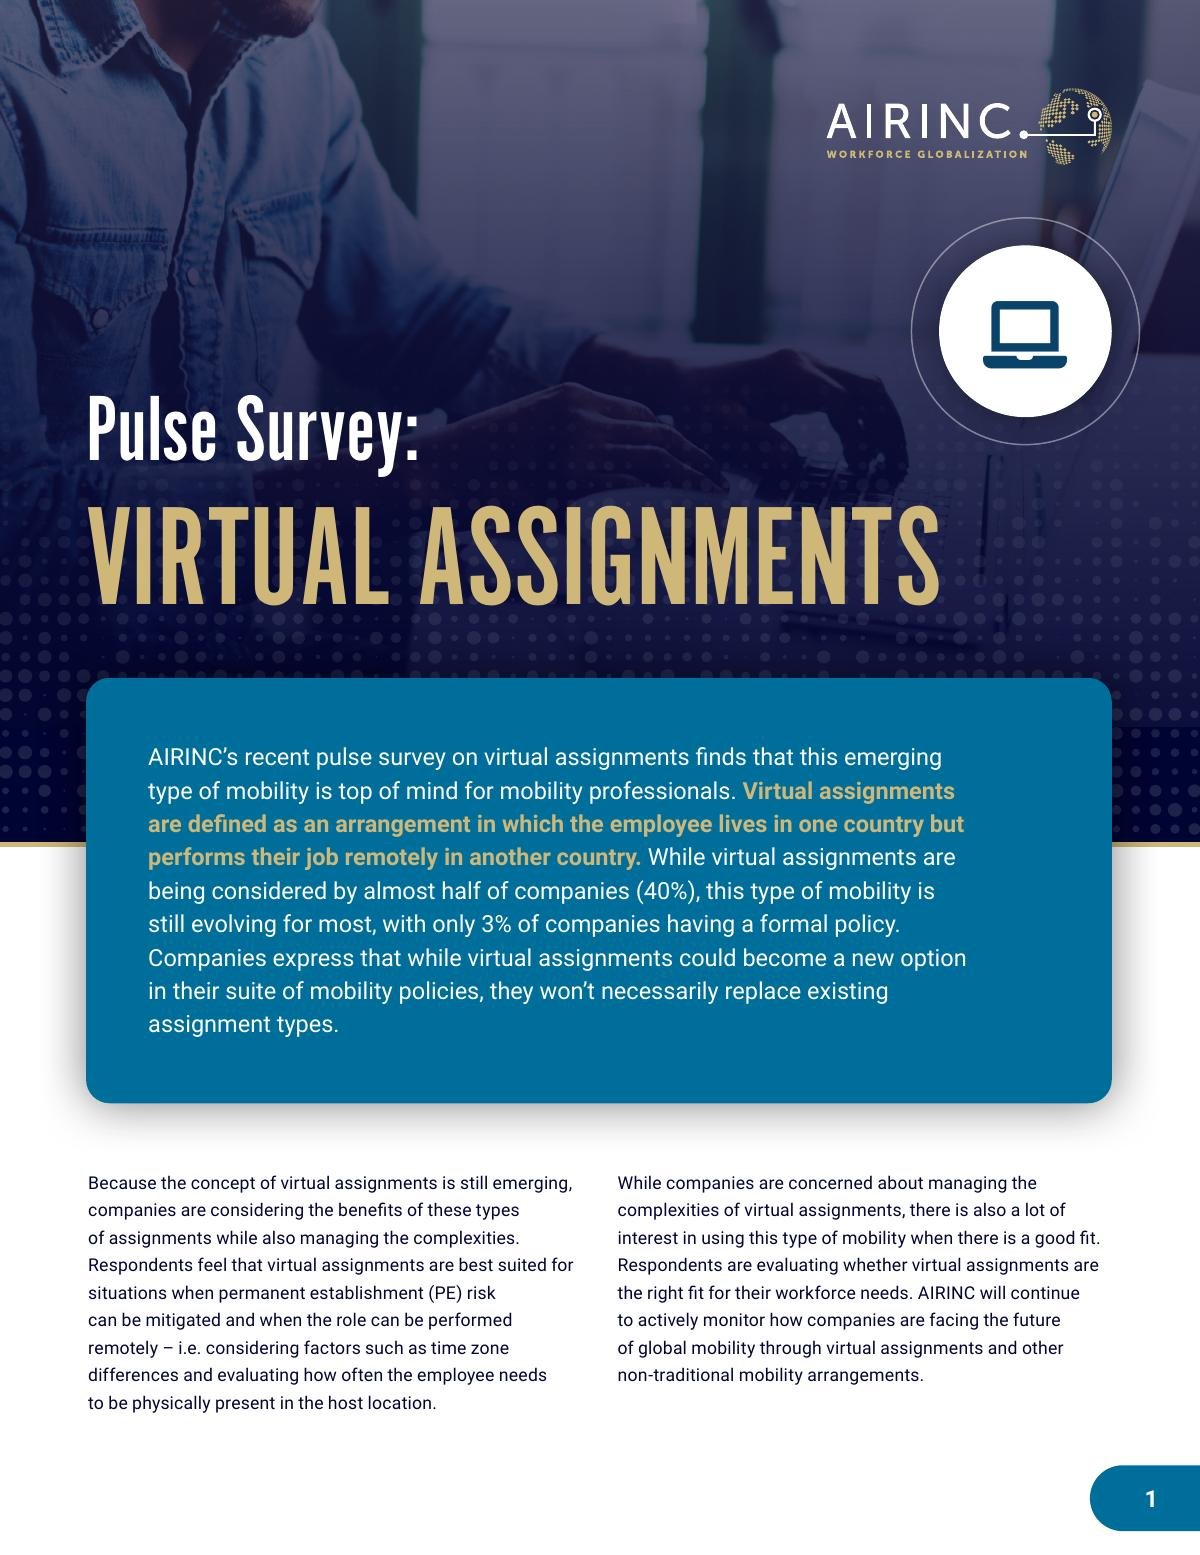 Virtual Assignments